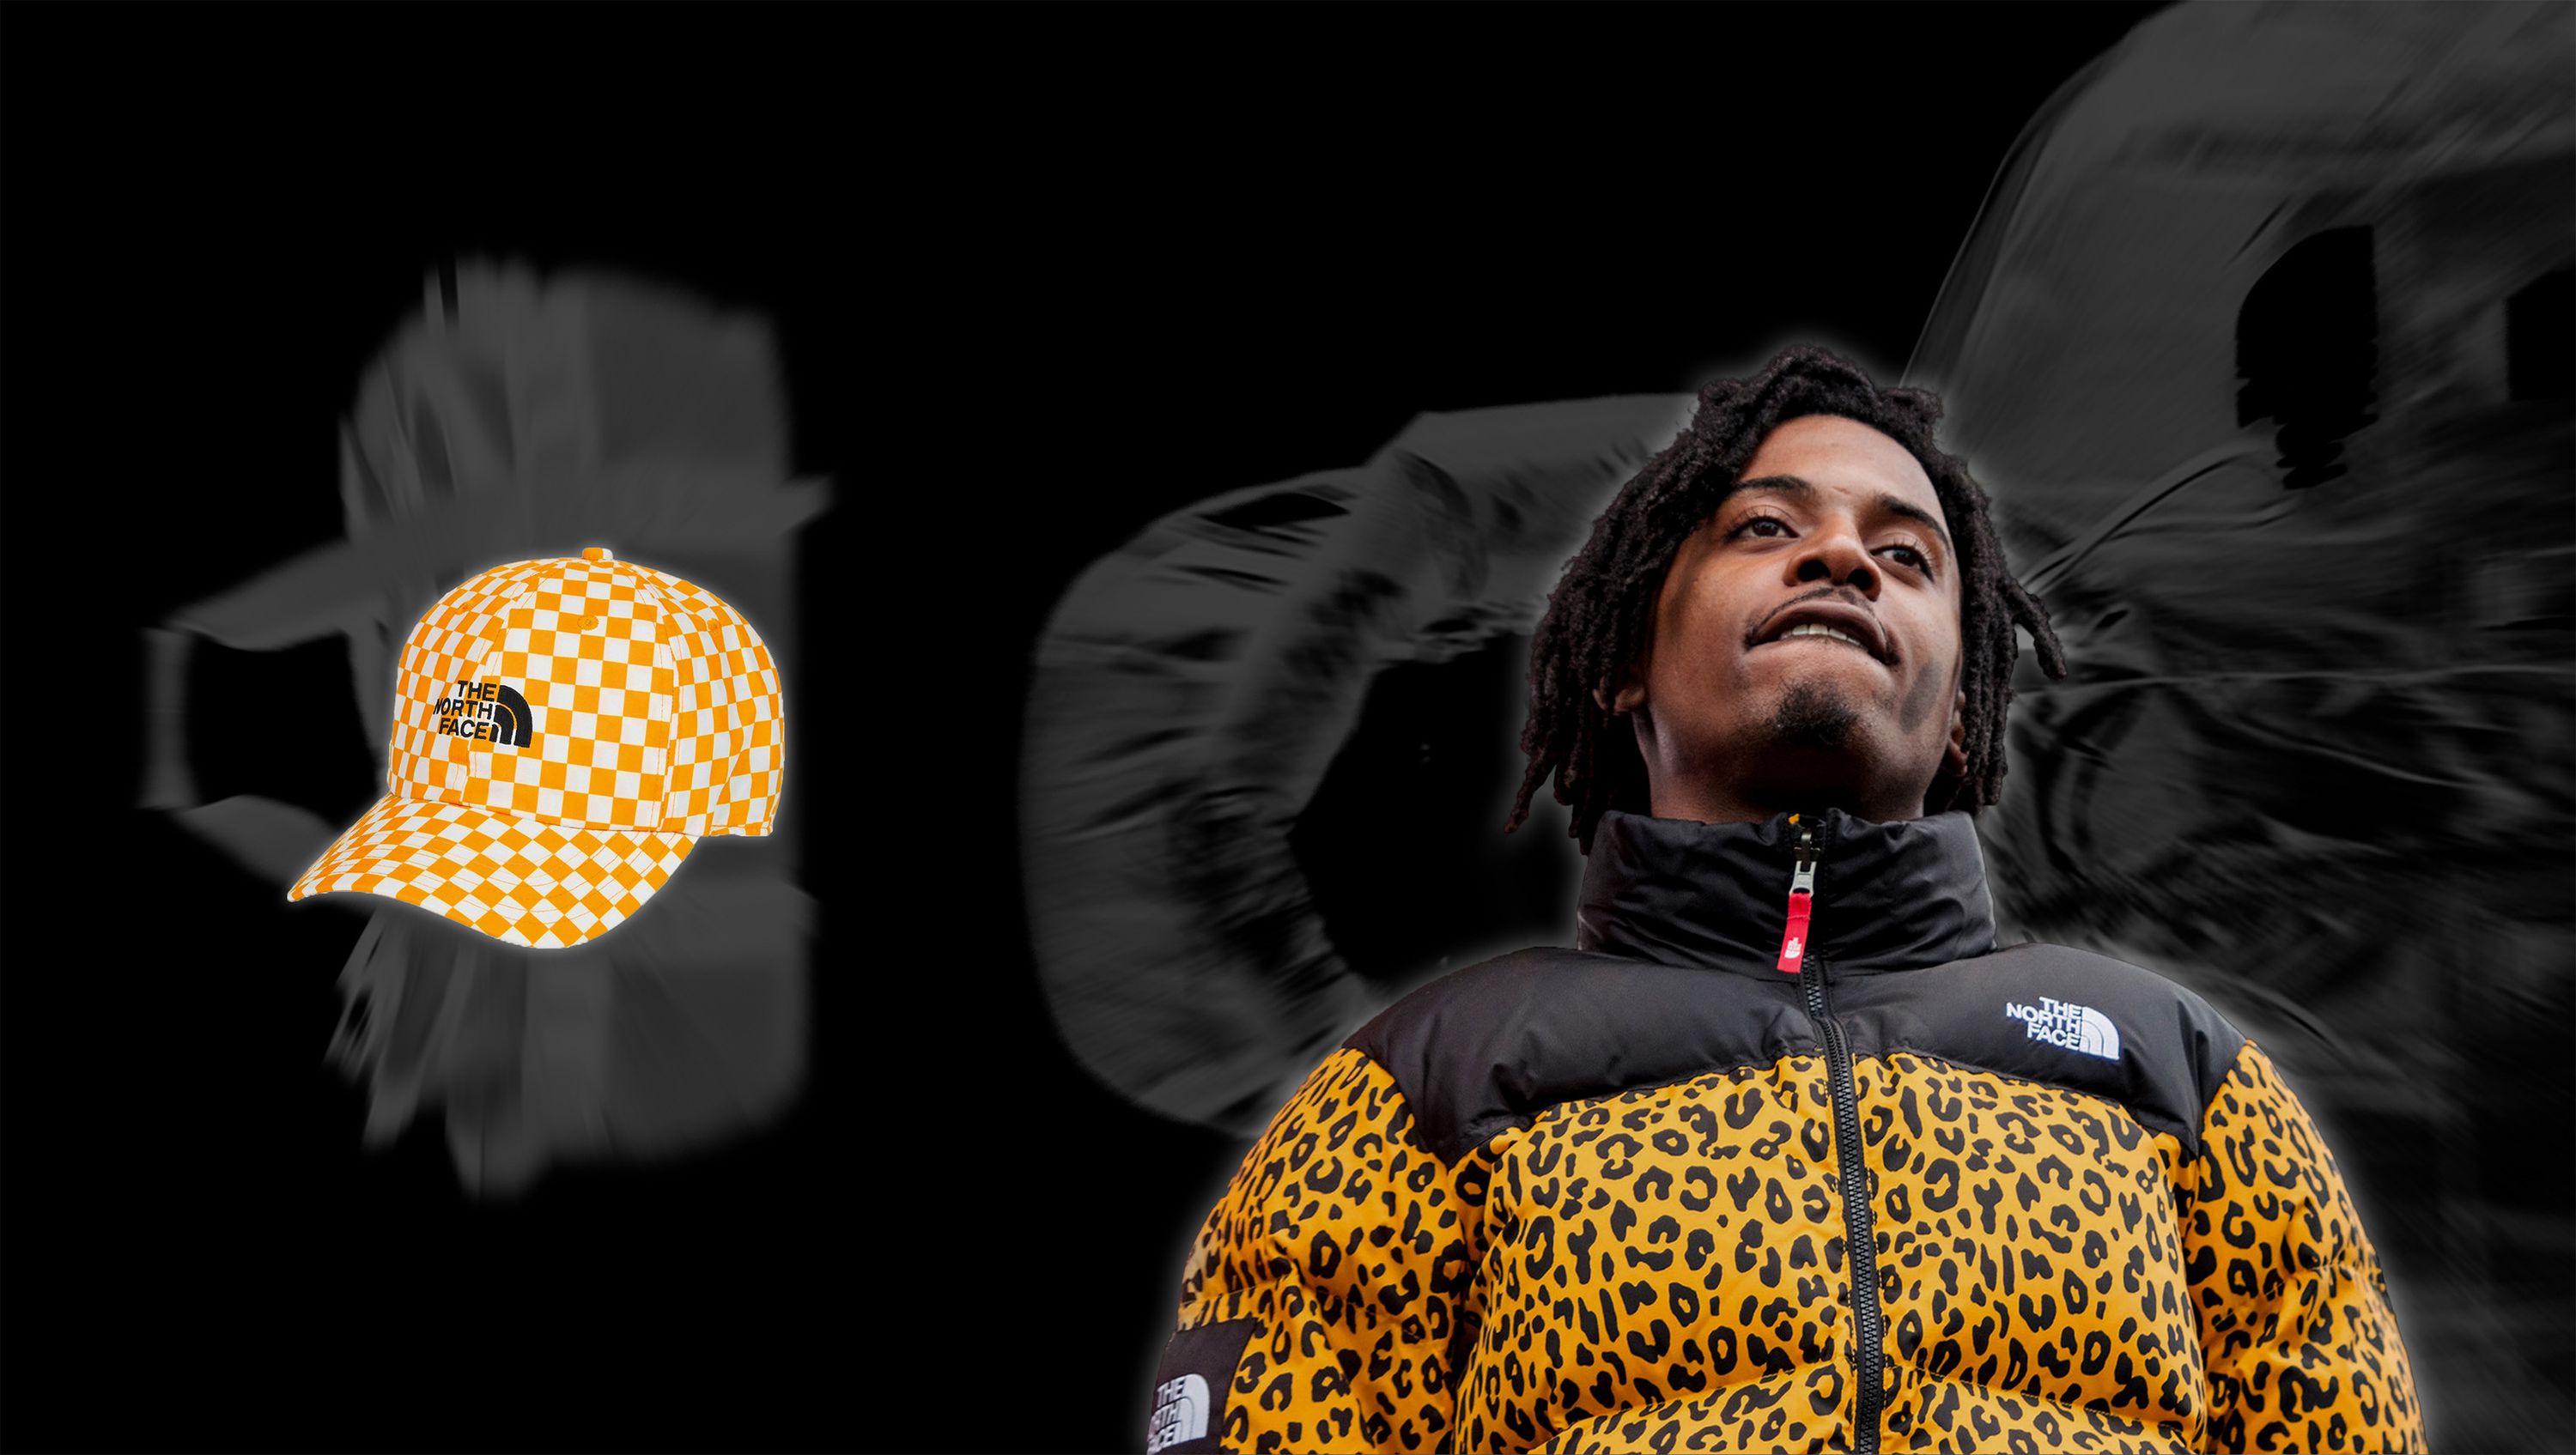 Supreme x The North Face - Yellow Trans Antarctica Expedition Fleece –  eluXive